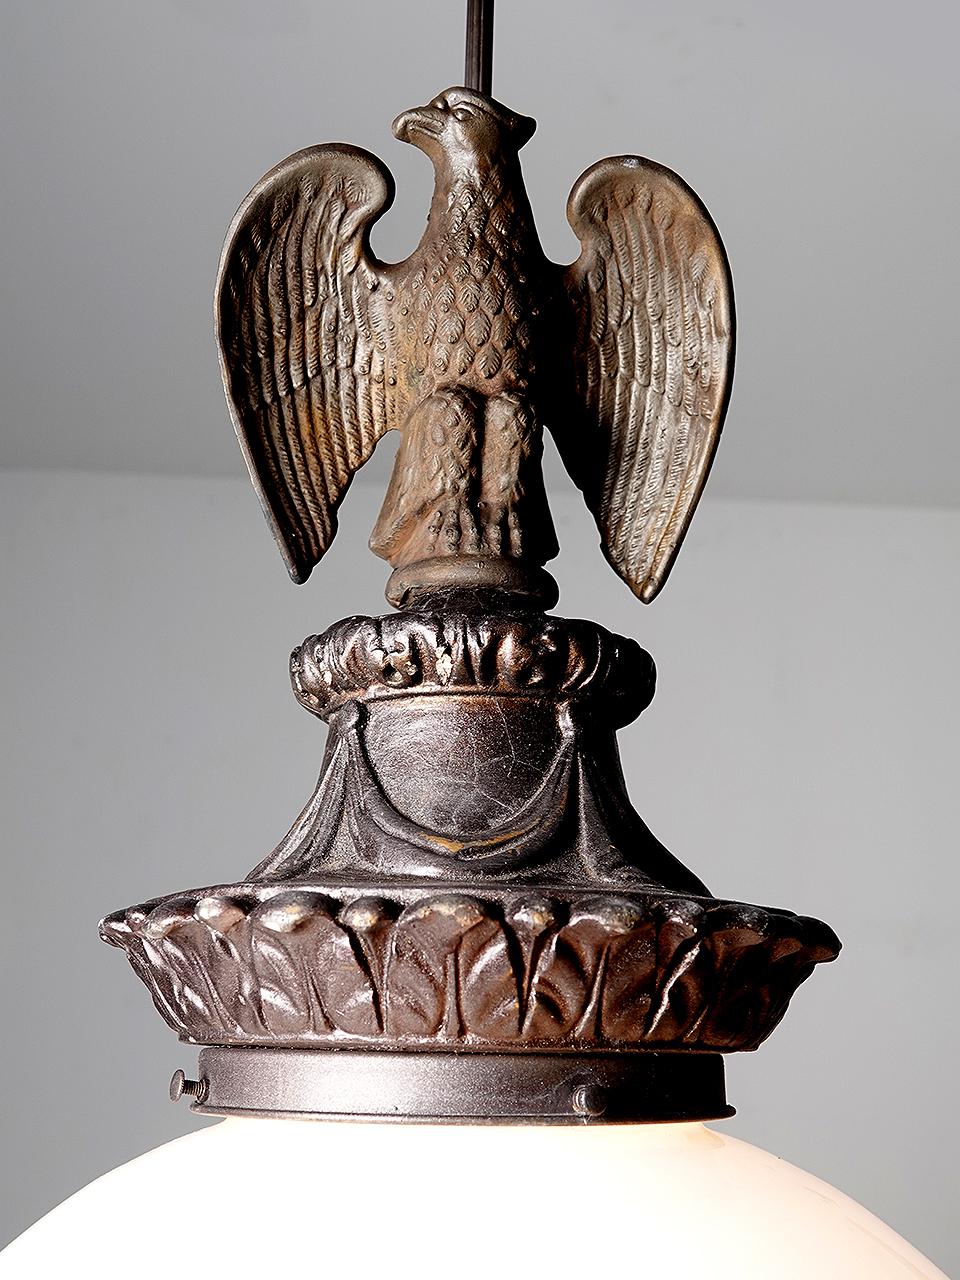 This lamp features a 16 inch diameter milk glass globe. I think thats the largest globe we have ever offered and it does make a statement. The decorative elements definitely say municipal building or bank. The impressive eagle on top is prominent